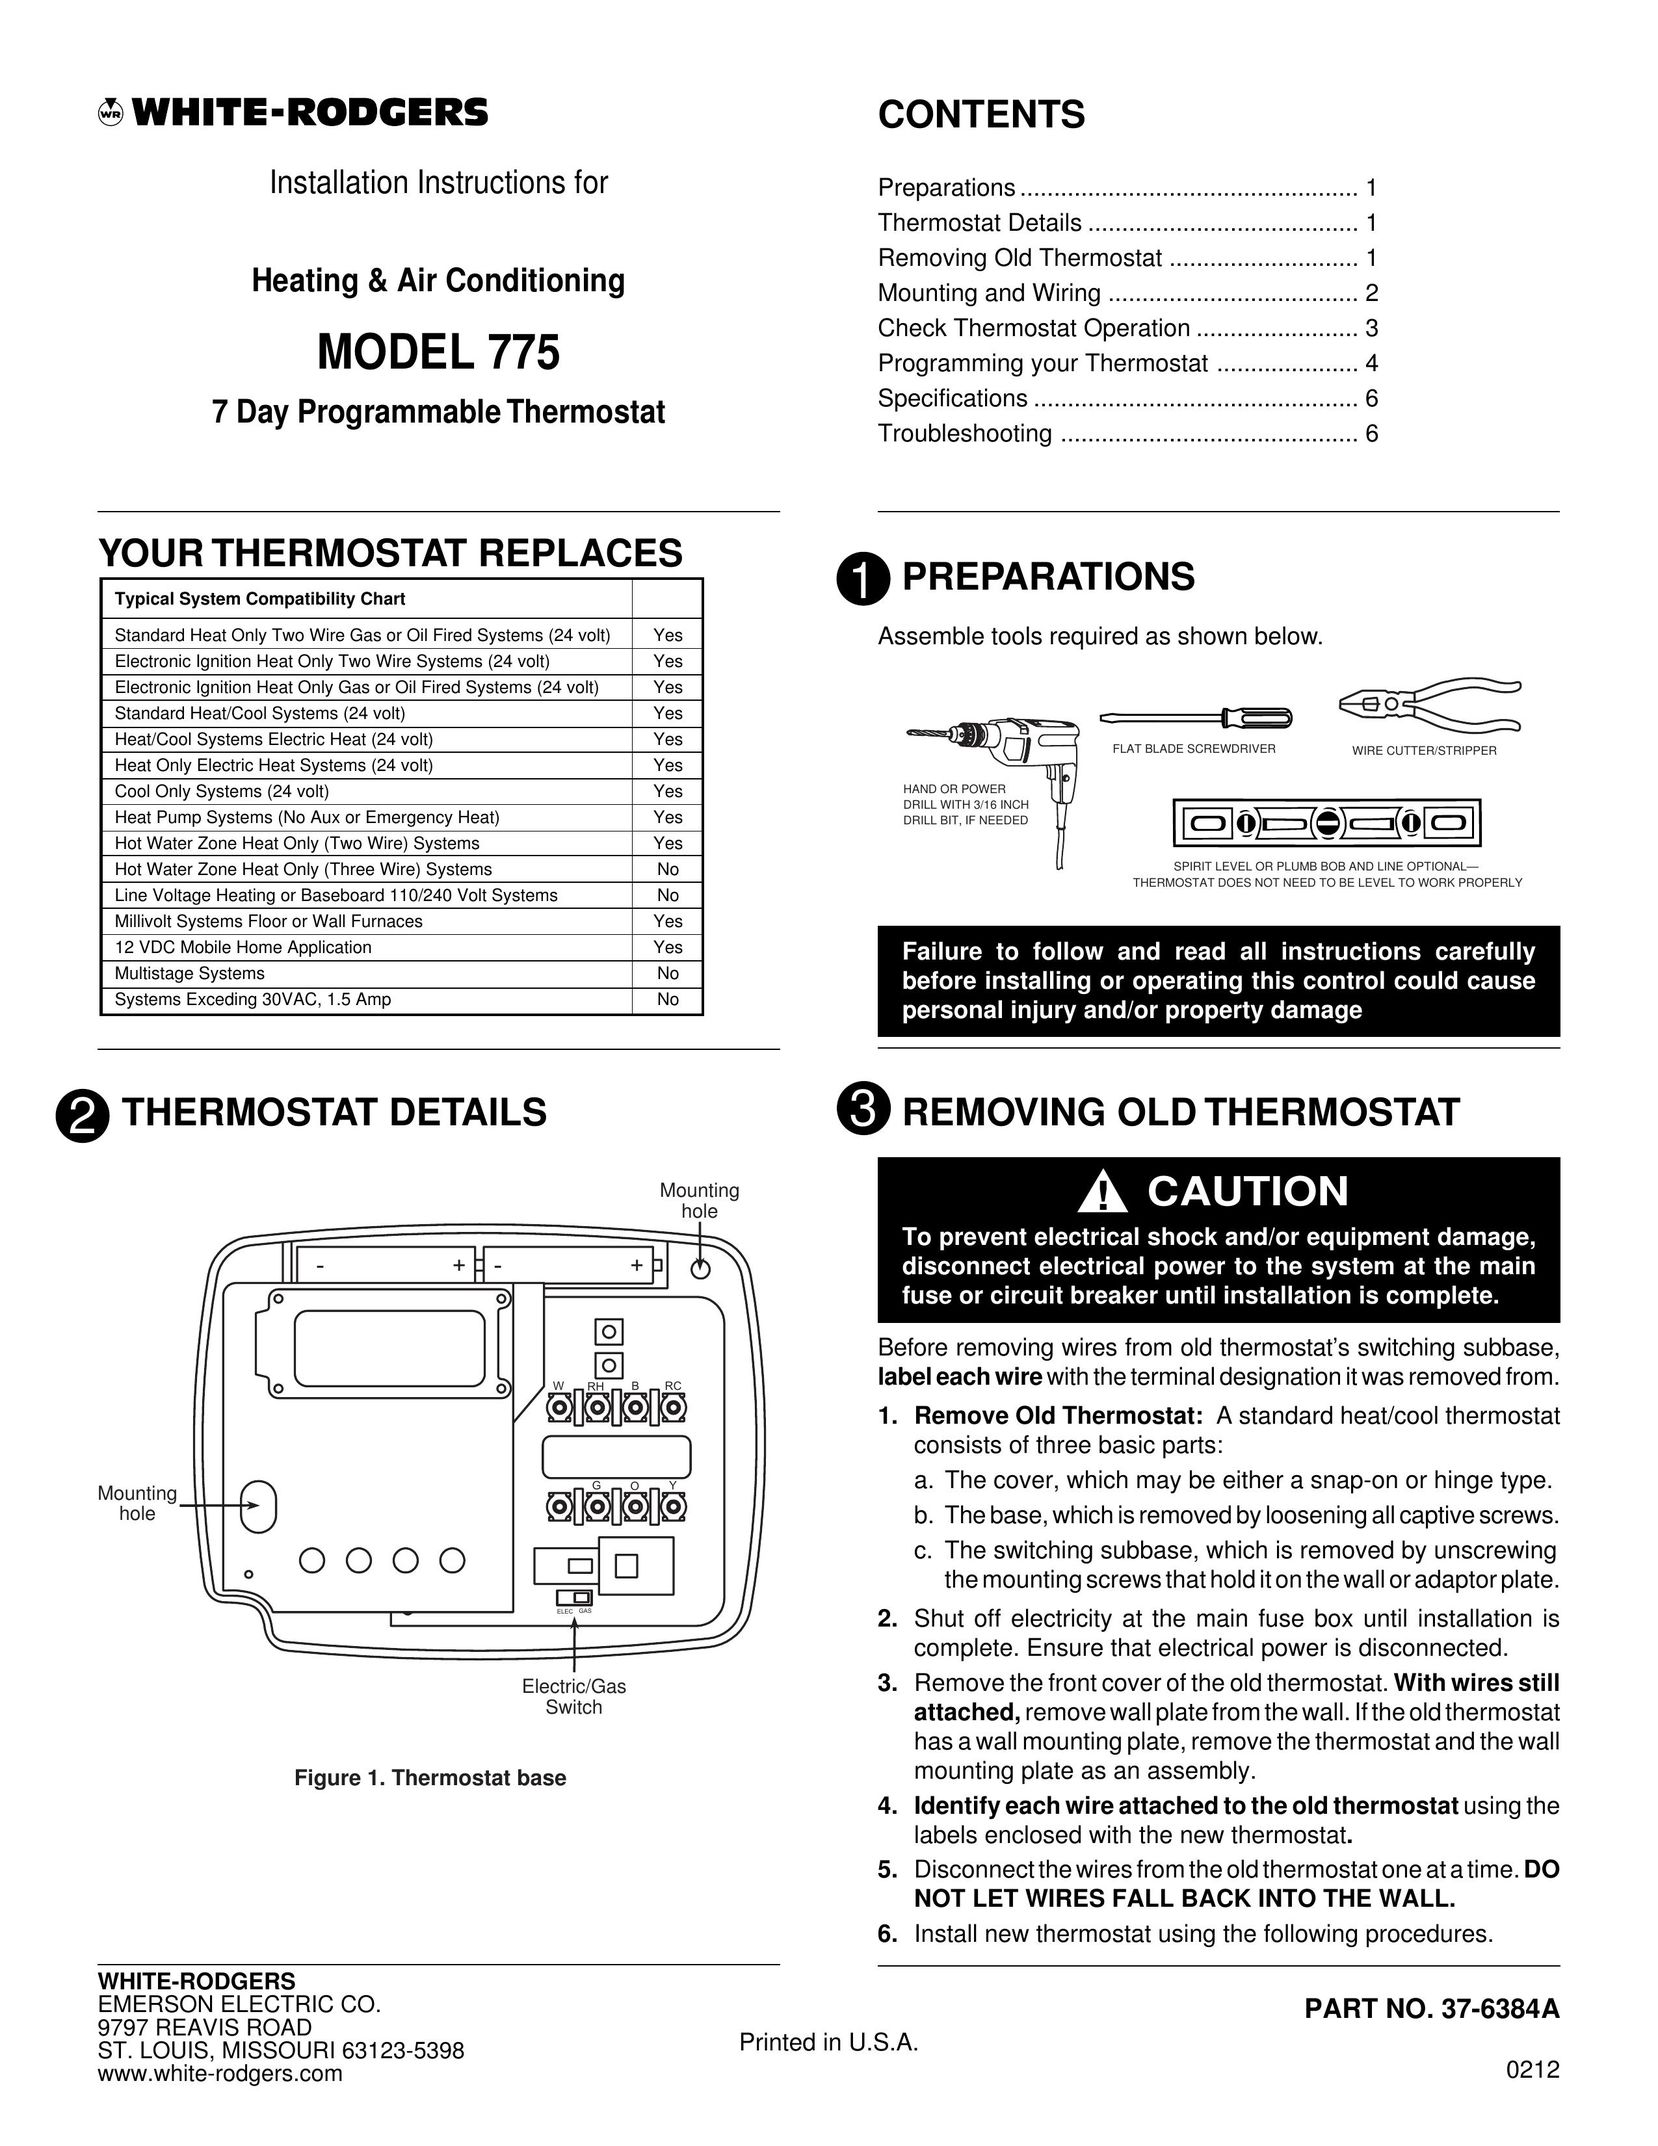 White Rodgers 775 Air Conditioner User Manual